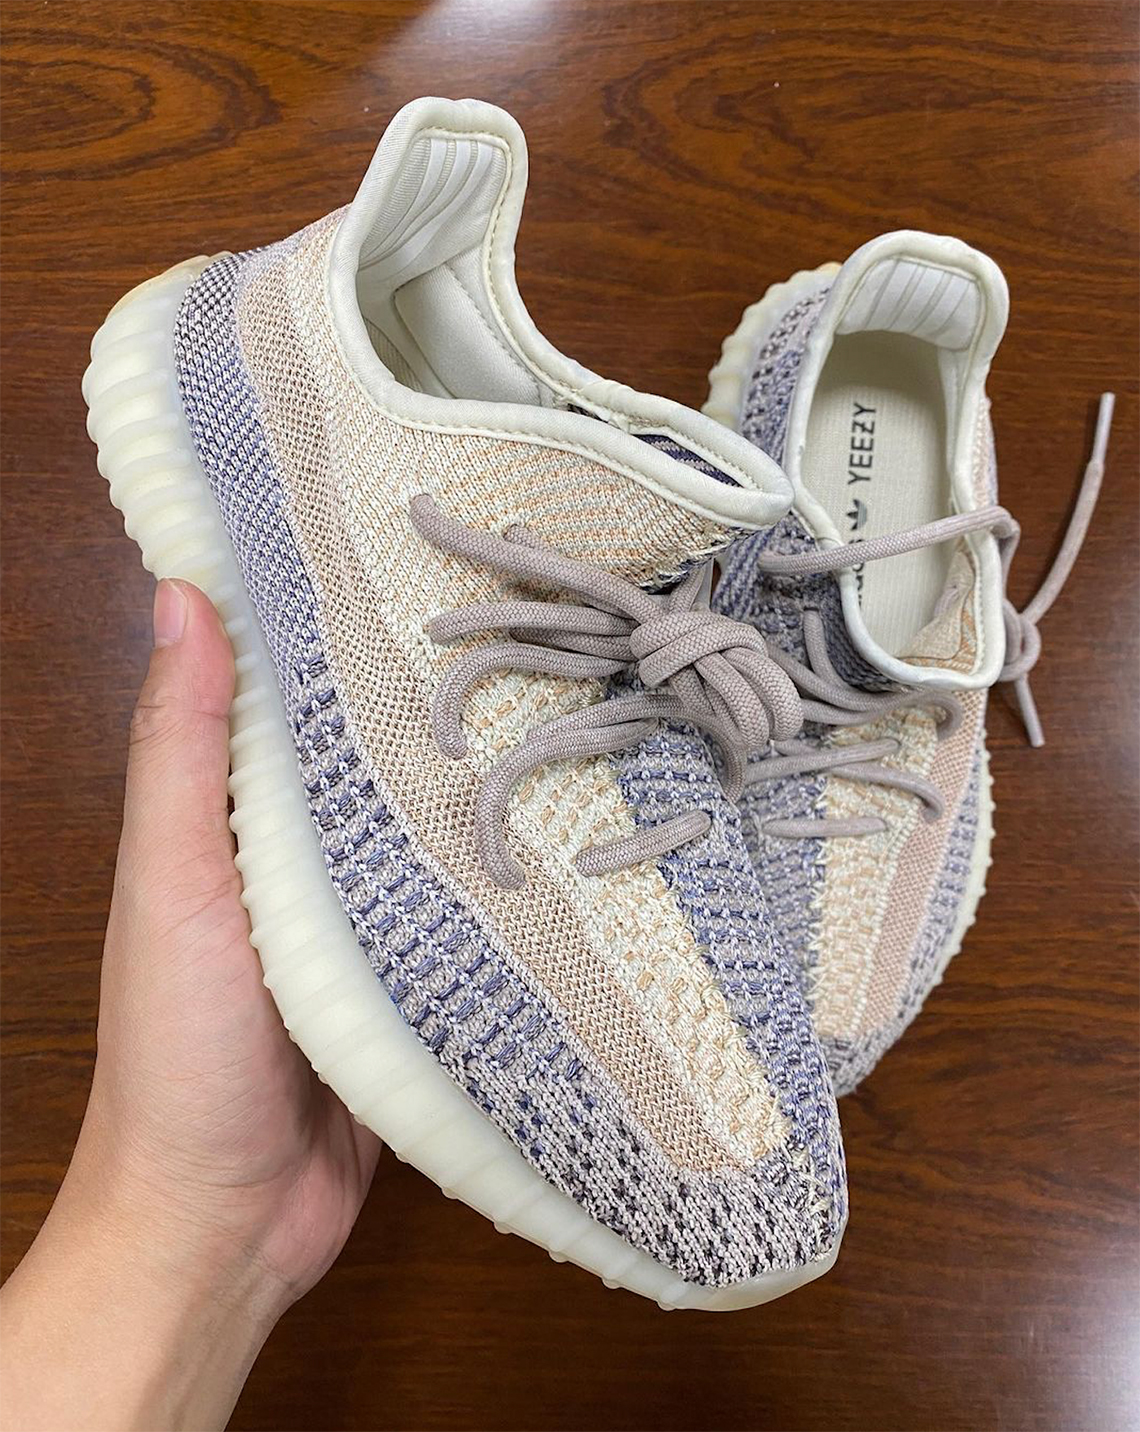 First Look At The adidas Yeezy Boost 350 v2 “Ash Pearl” – Street Sense